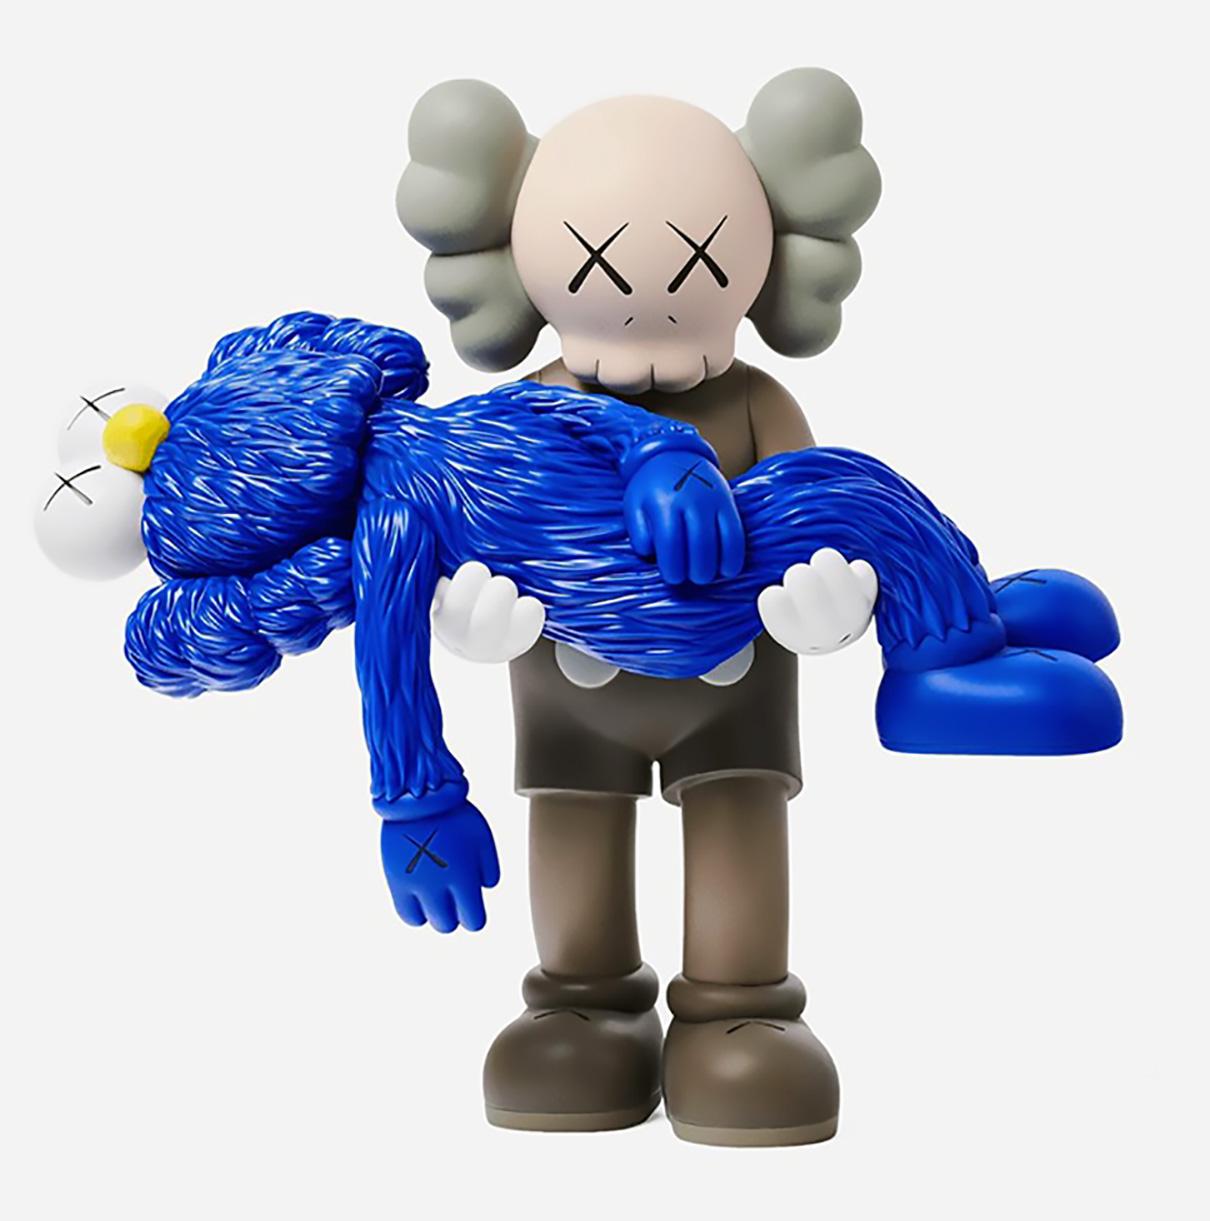 KAWS GONE: Complete set of 3 figures: new & unopened in their original packaging. 

A well-received work and variation of KAWS' large scale GONE sculpture - a key highlight of KAWS’ recent exhibition, 'KAWS: Companionship in the Age of Loneliness'